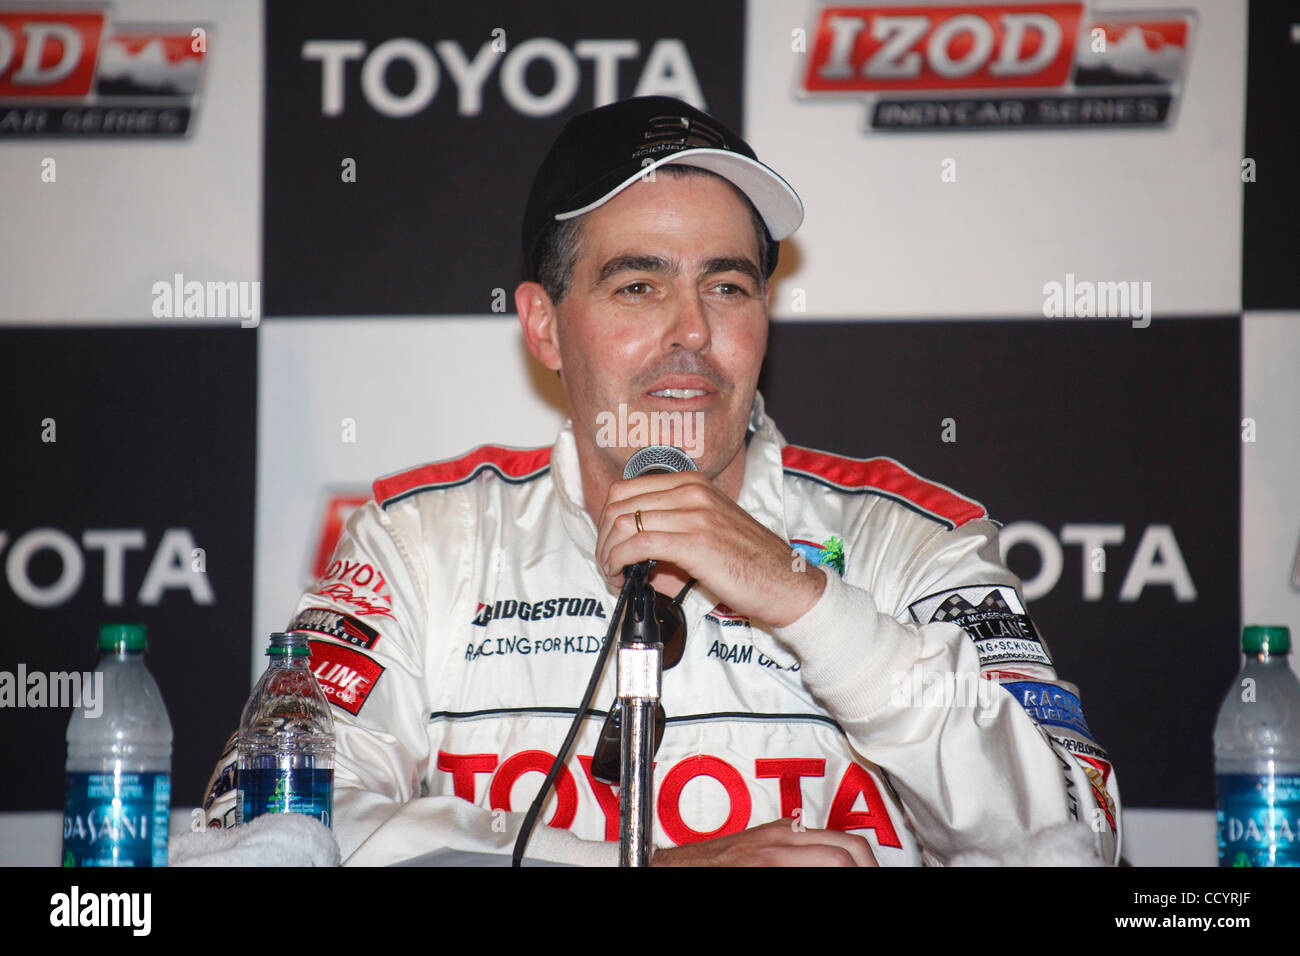 Apr 16, 2010 - Long Beach, California, USA - ADAM COROLLA  at a press conference after qualifying rounds at the Celebrity/Pro Race at the Long Beach Grand Prix (Credit Image: © Kayte Deioma/ZUMA Press) Stock Photo